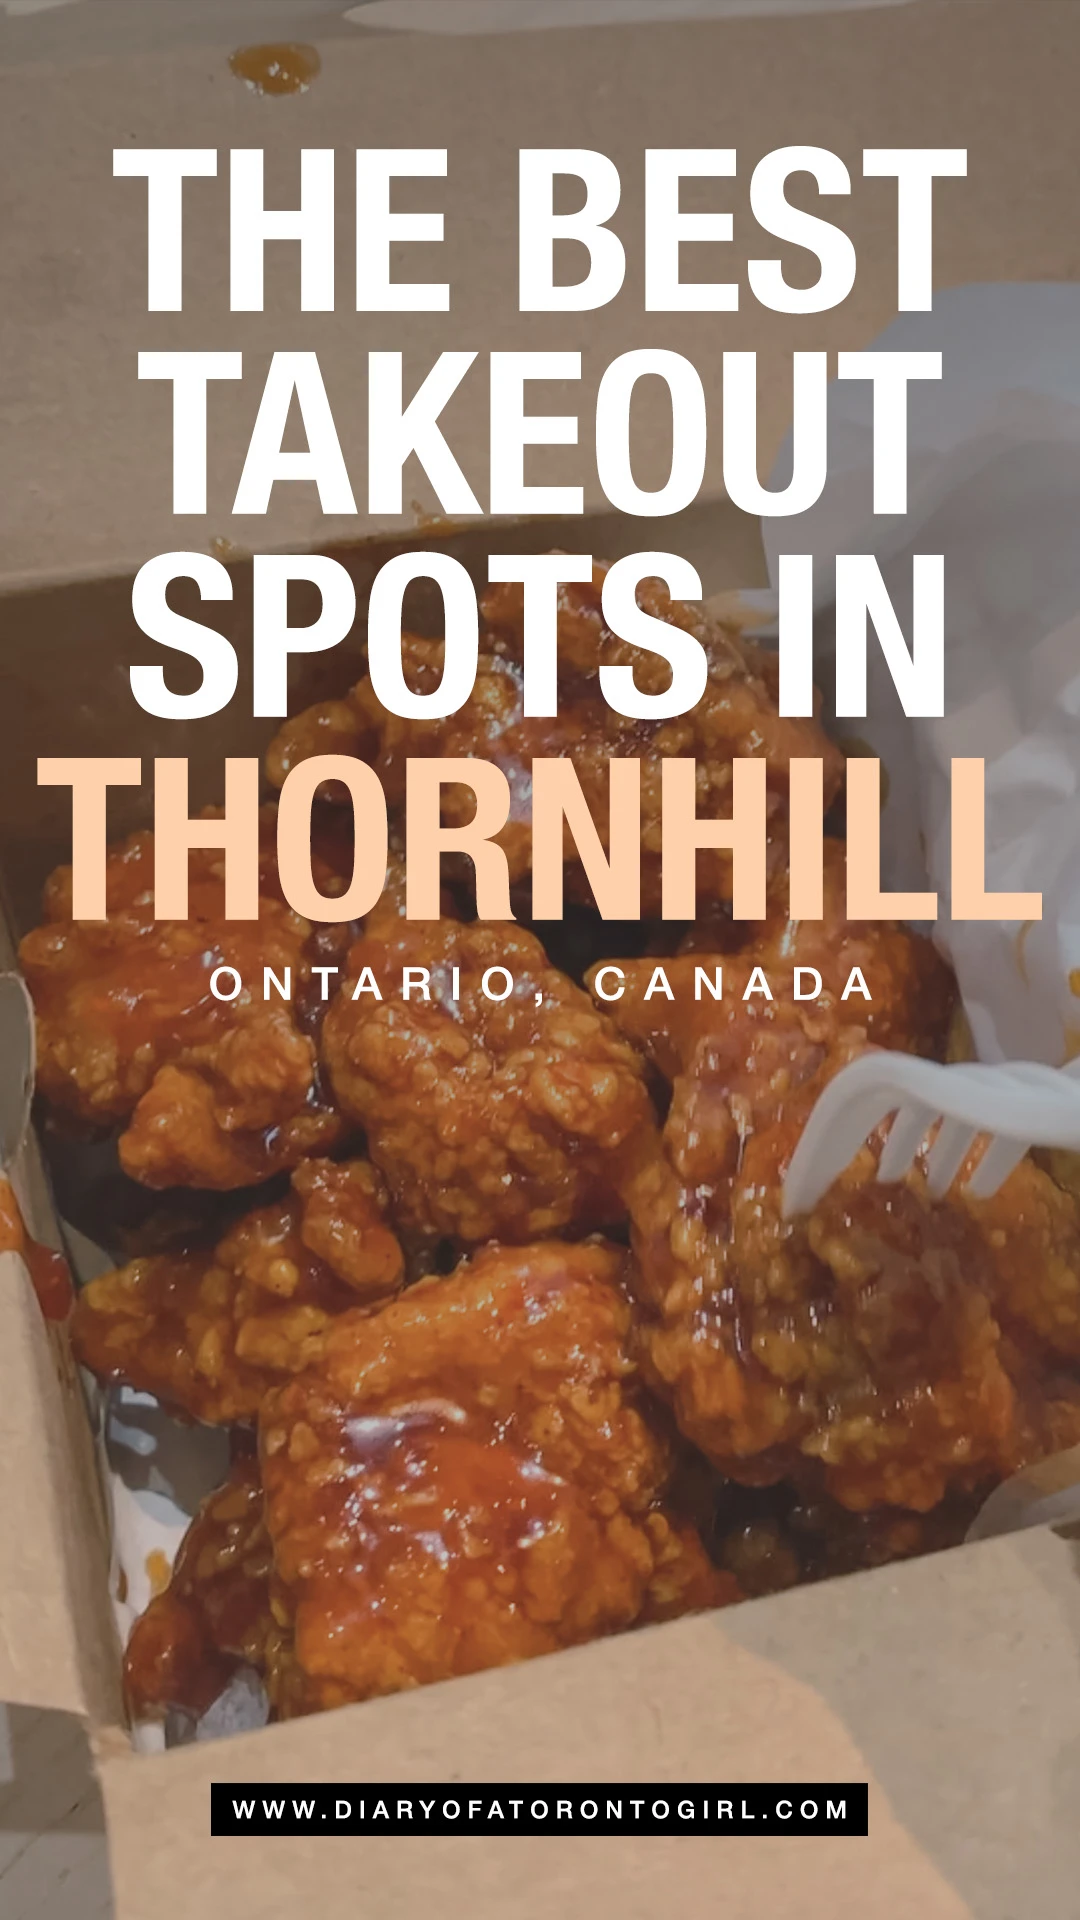 Best takeout spots in Thornhill, Ontario